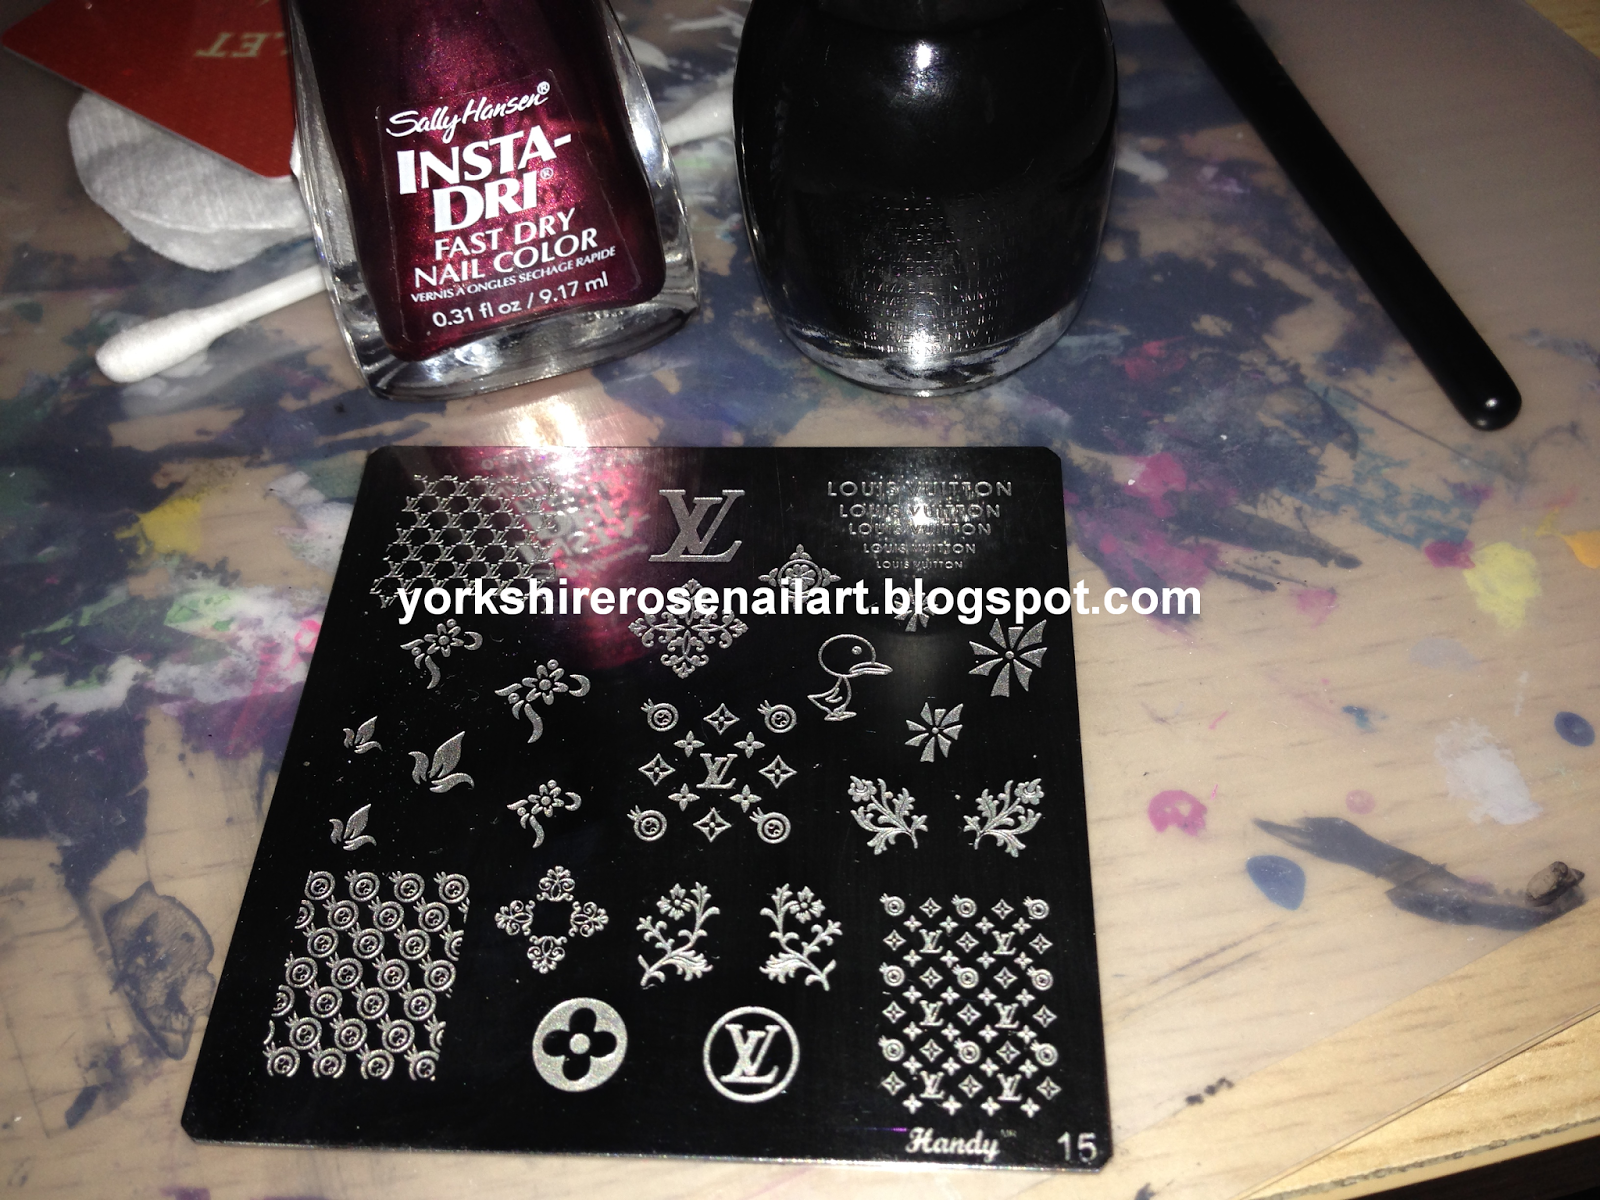 ZZ Louis Vuitton Stamping plate